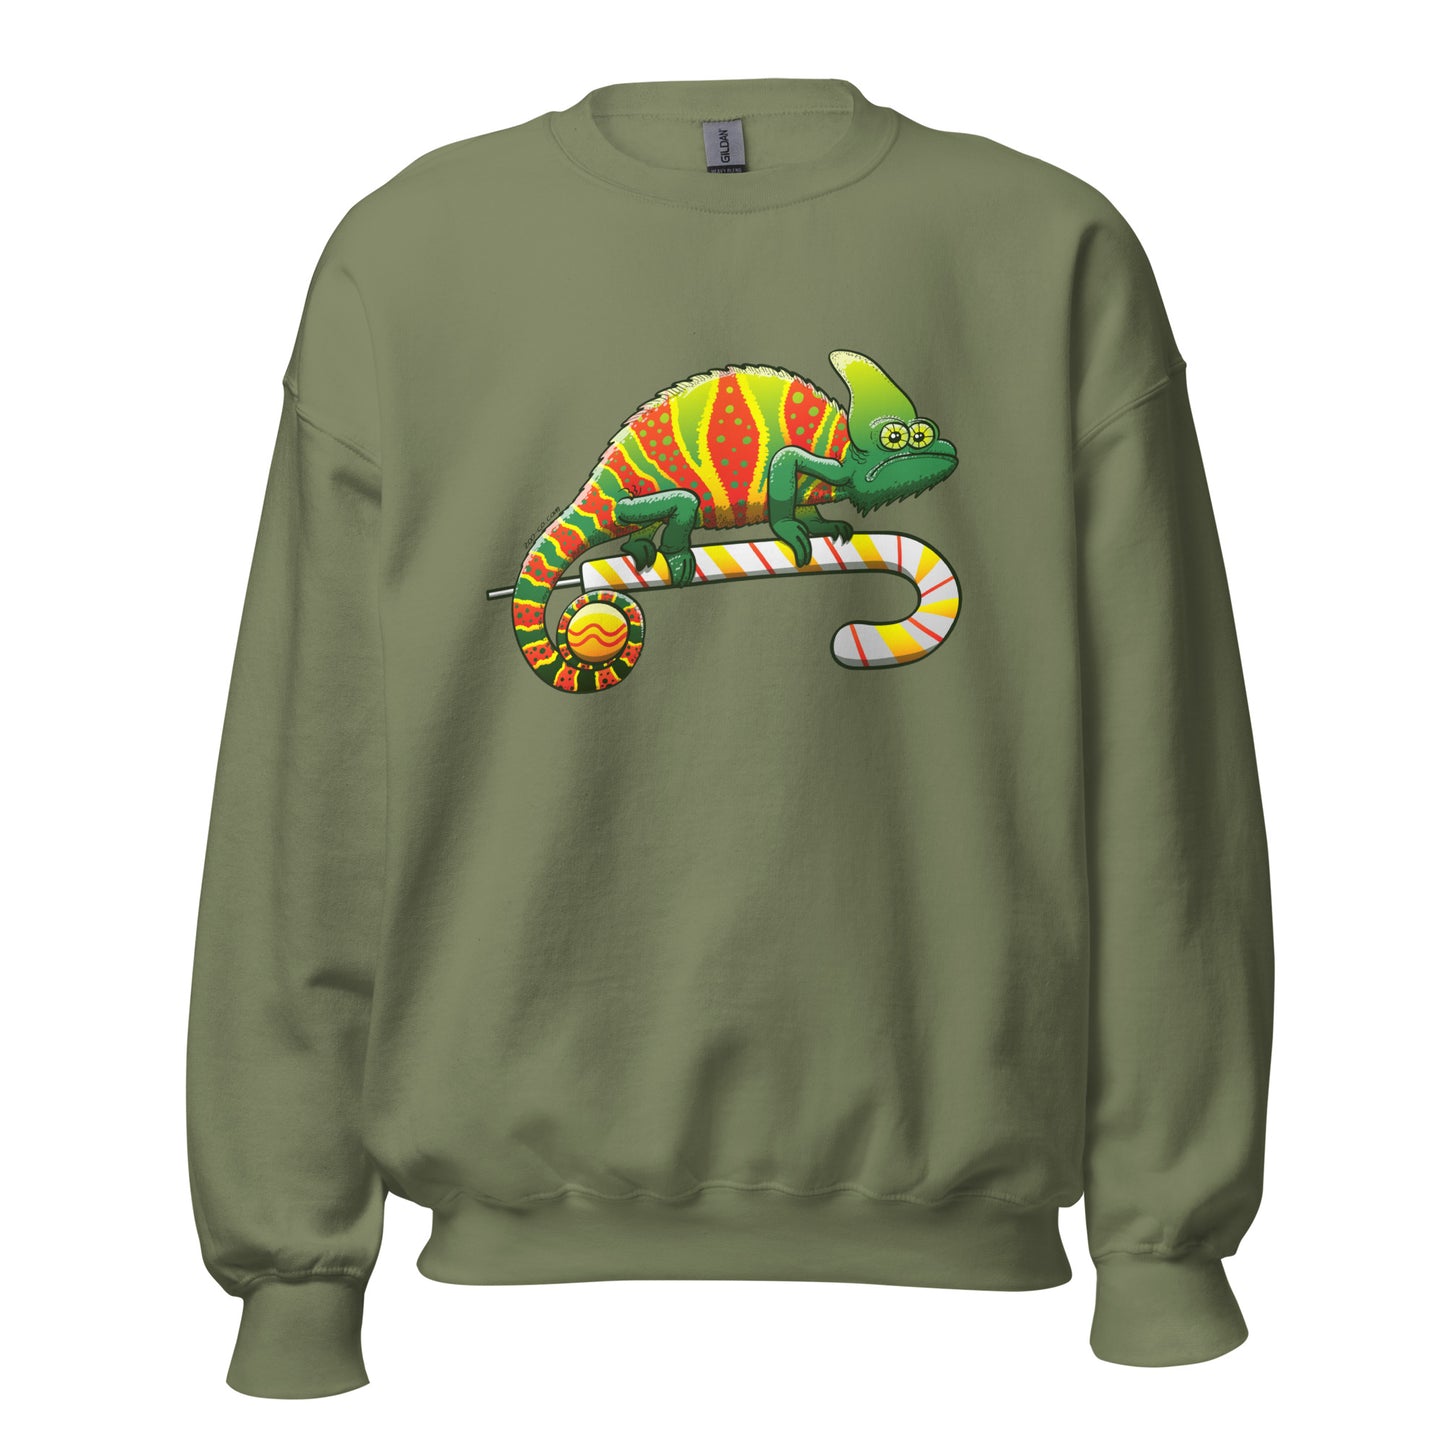 Christmas chameleon ready for the big season - Unisex Sweatshirt. Military green. Front view